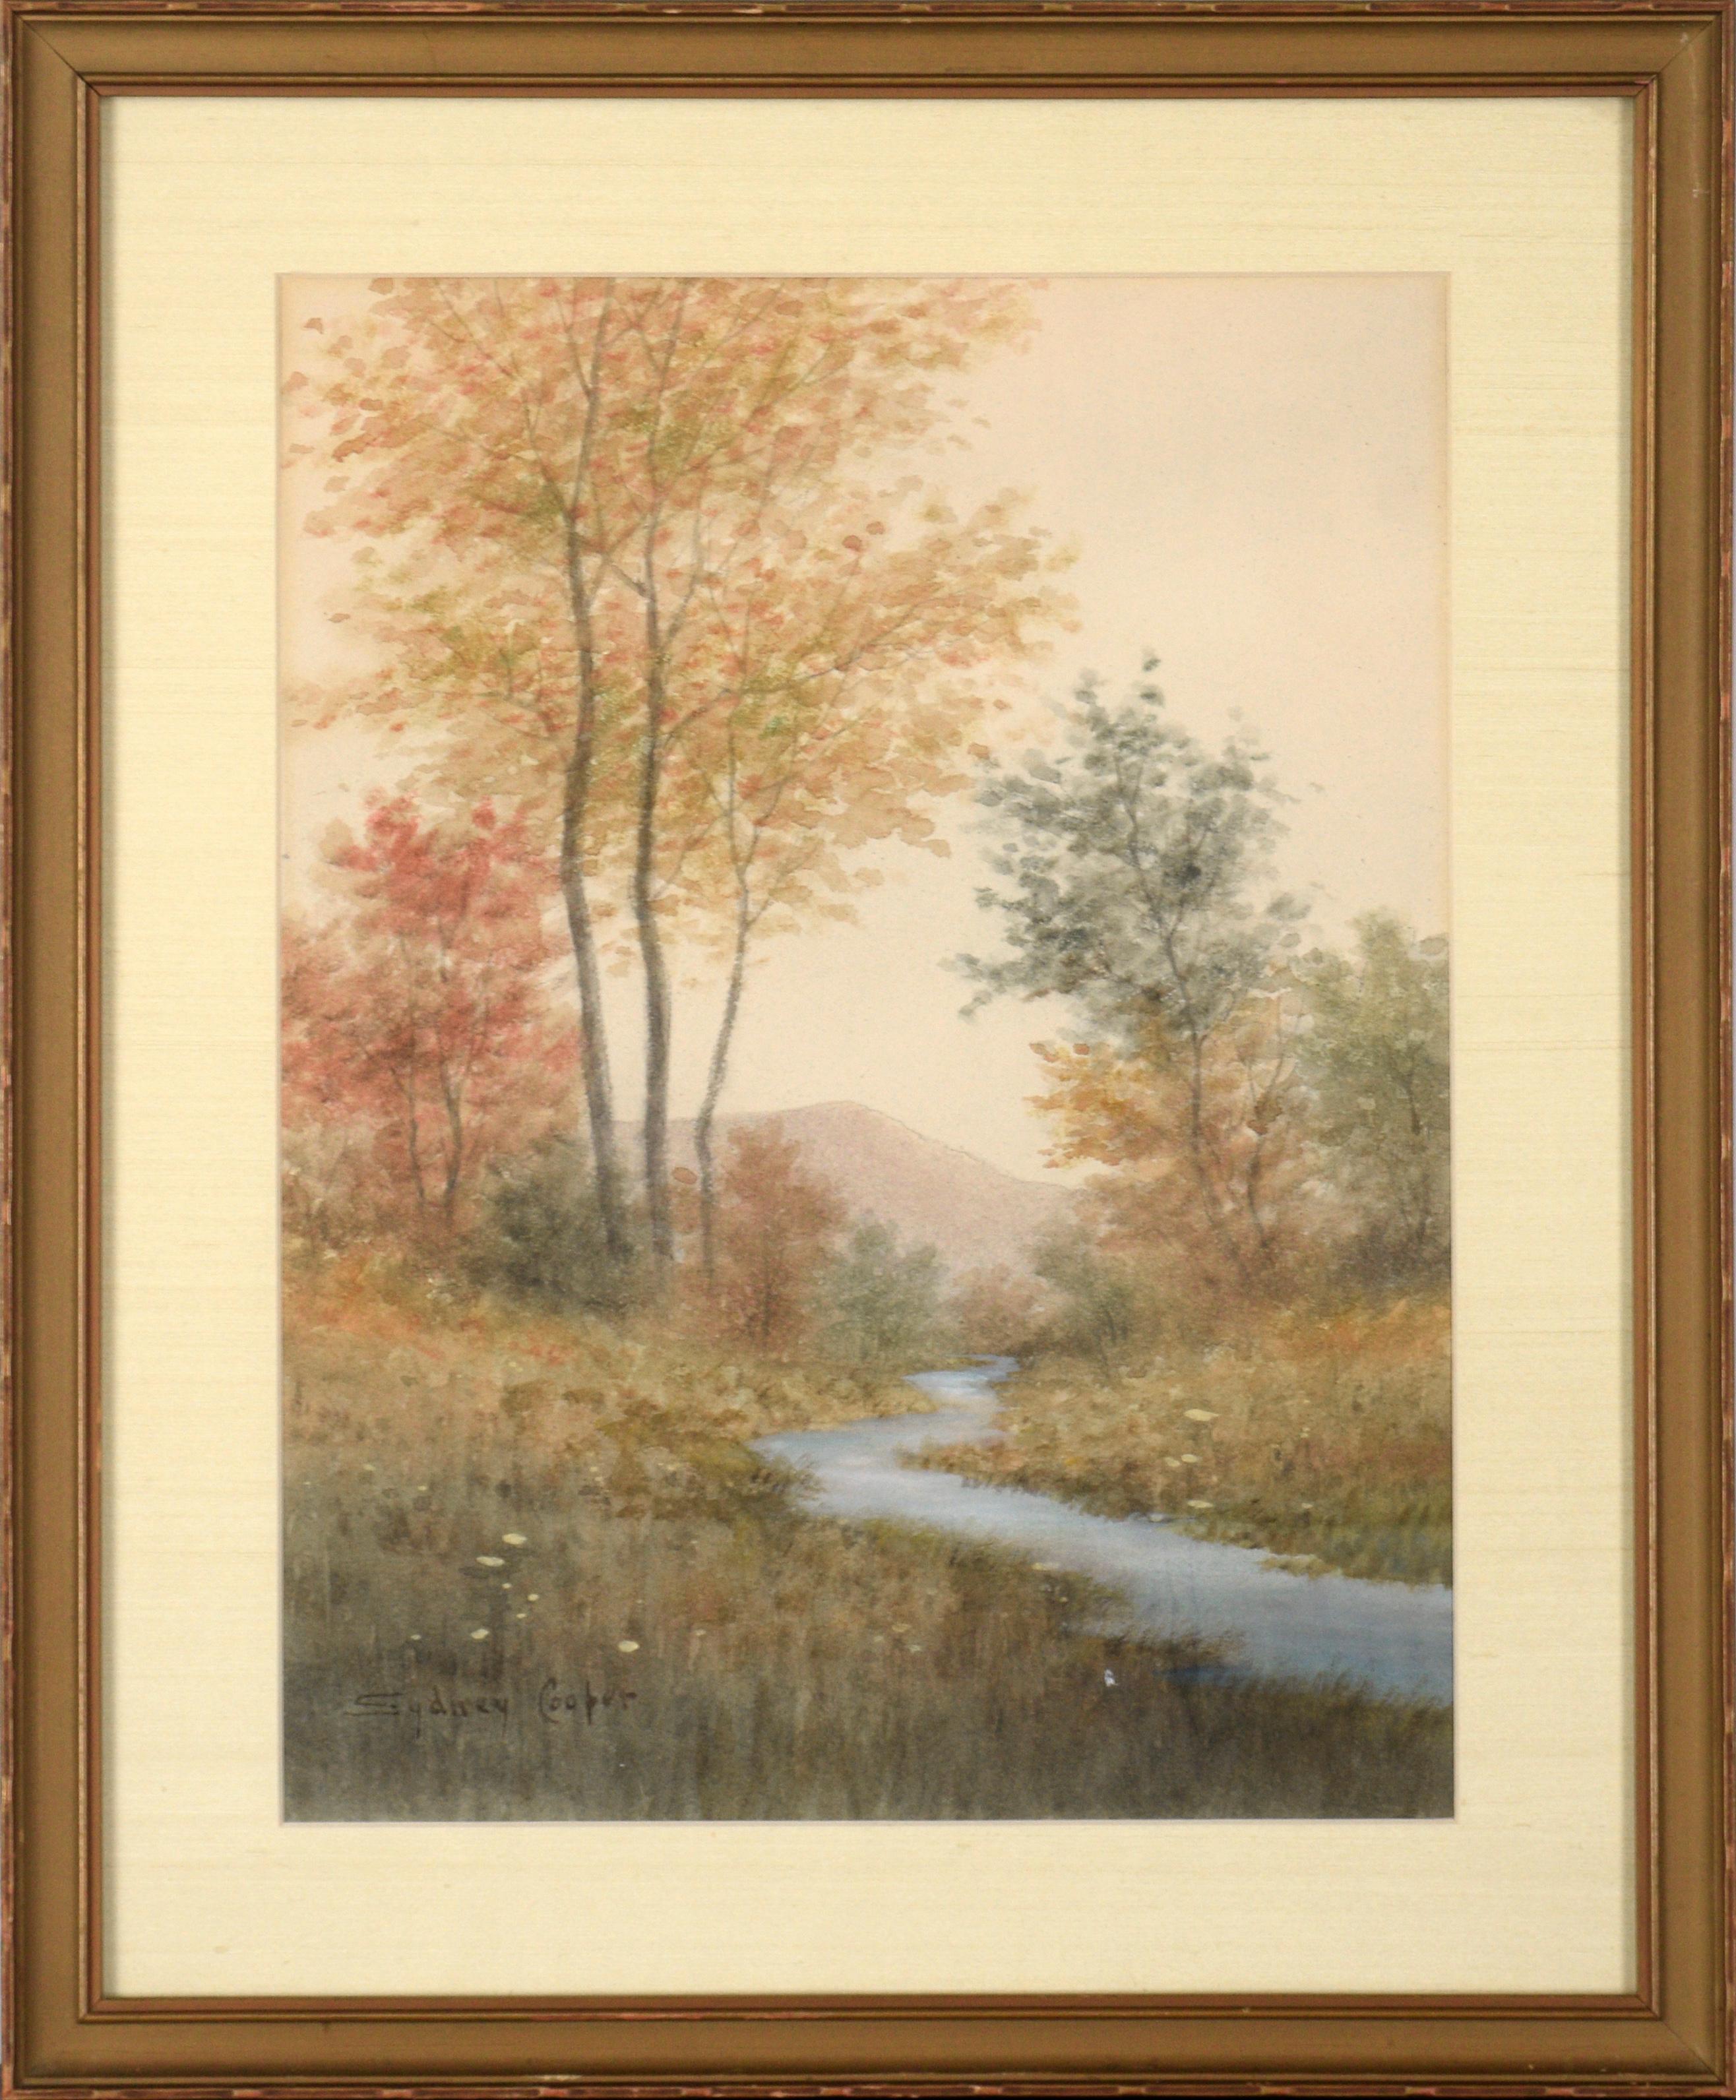 Sydney Cooper Landscape Art - Autumn by the Stream, Early 20th Century Landscape Watercolor 